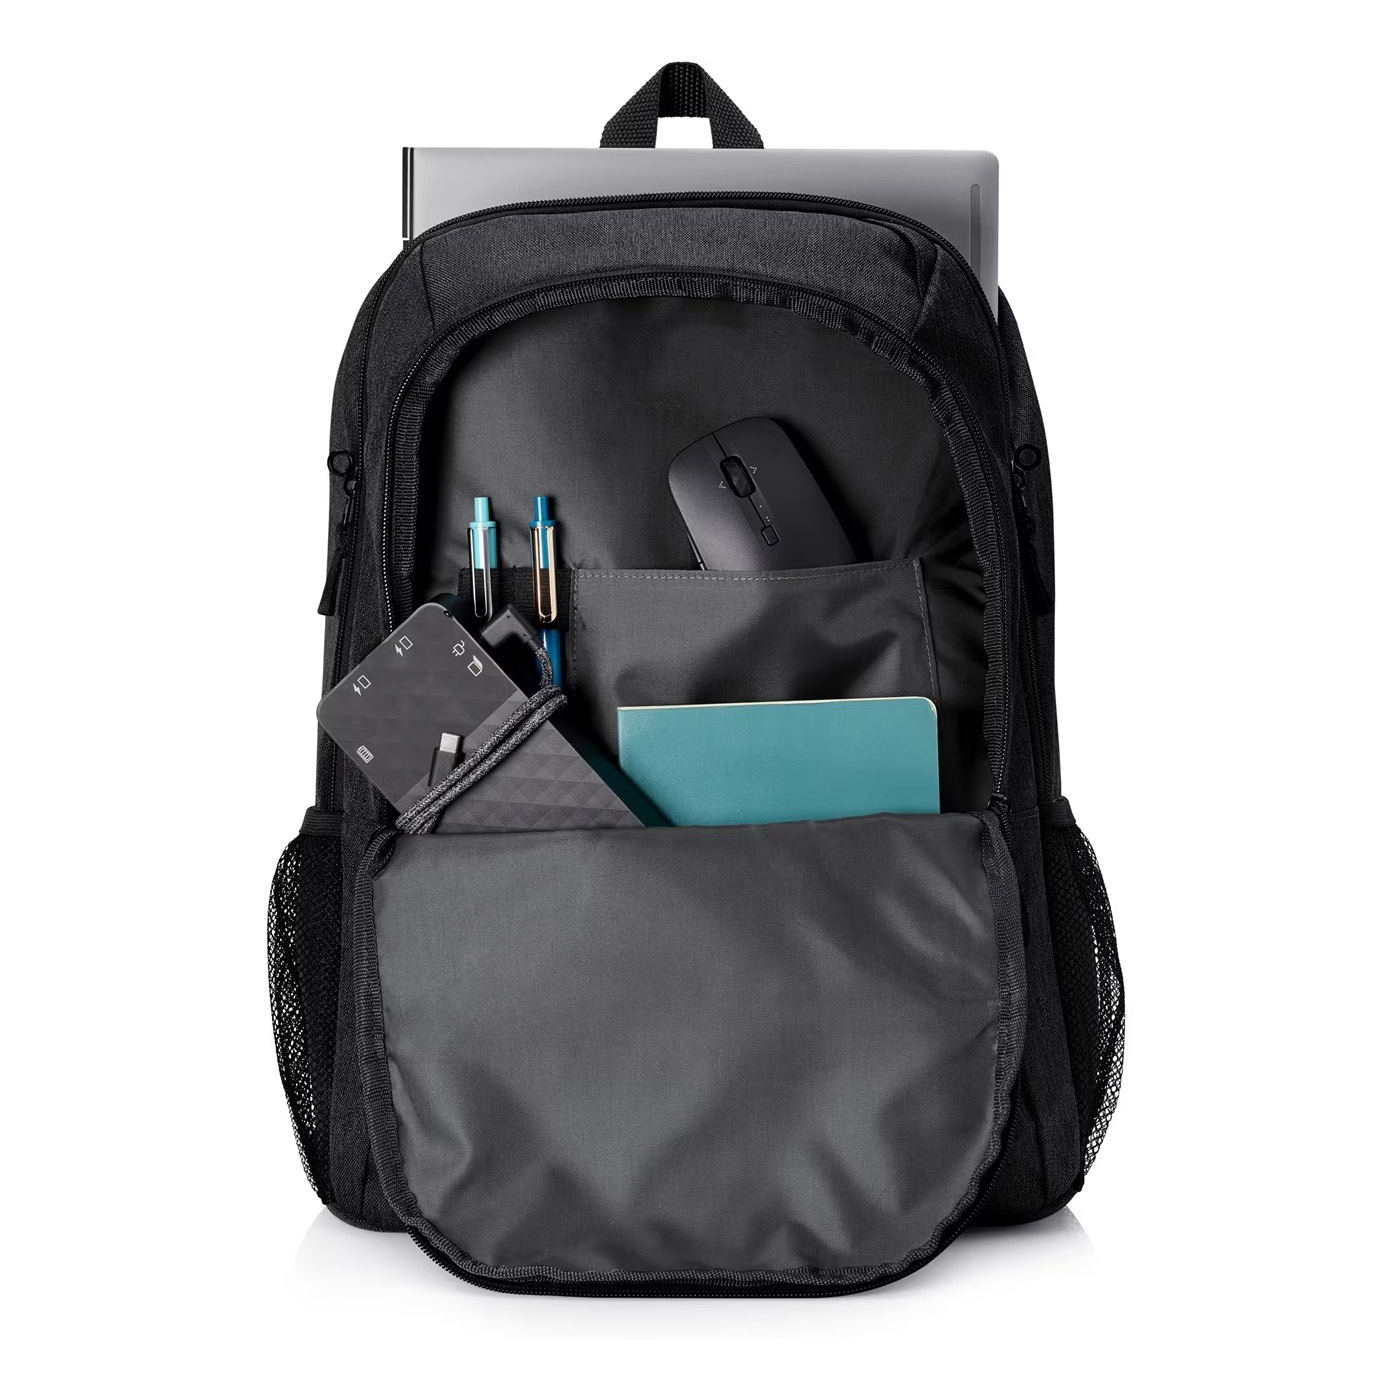 HP Prelude Pro 15.6inch backpack detail 2